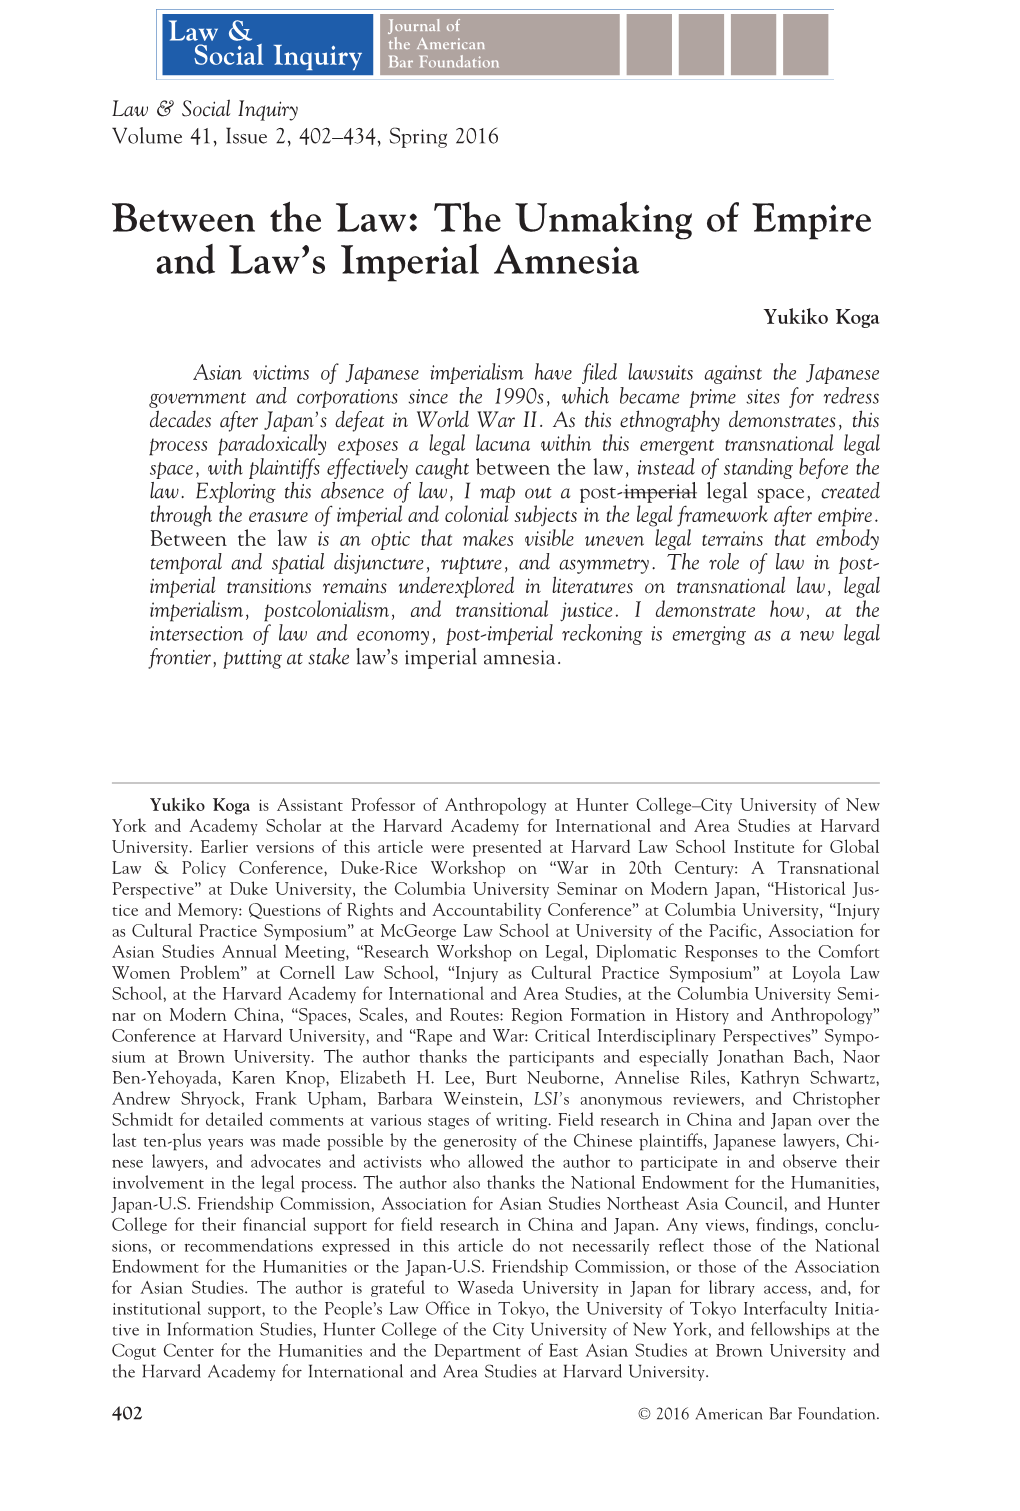 Between the Law: the Unmaking of Empire and Law’S Imperial Amnesia